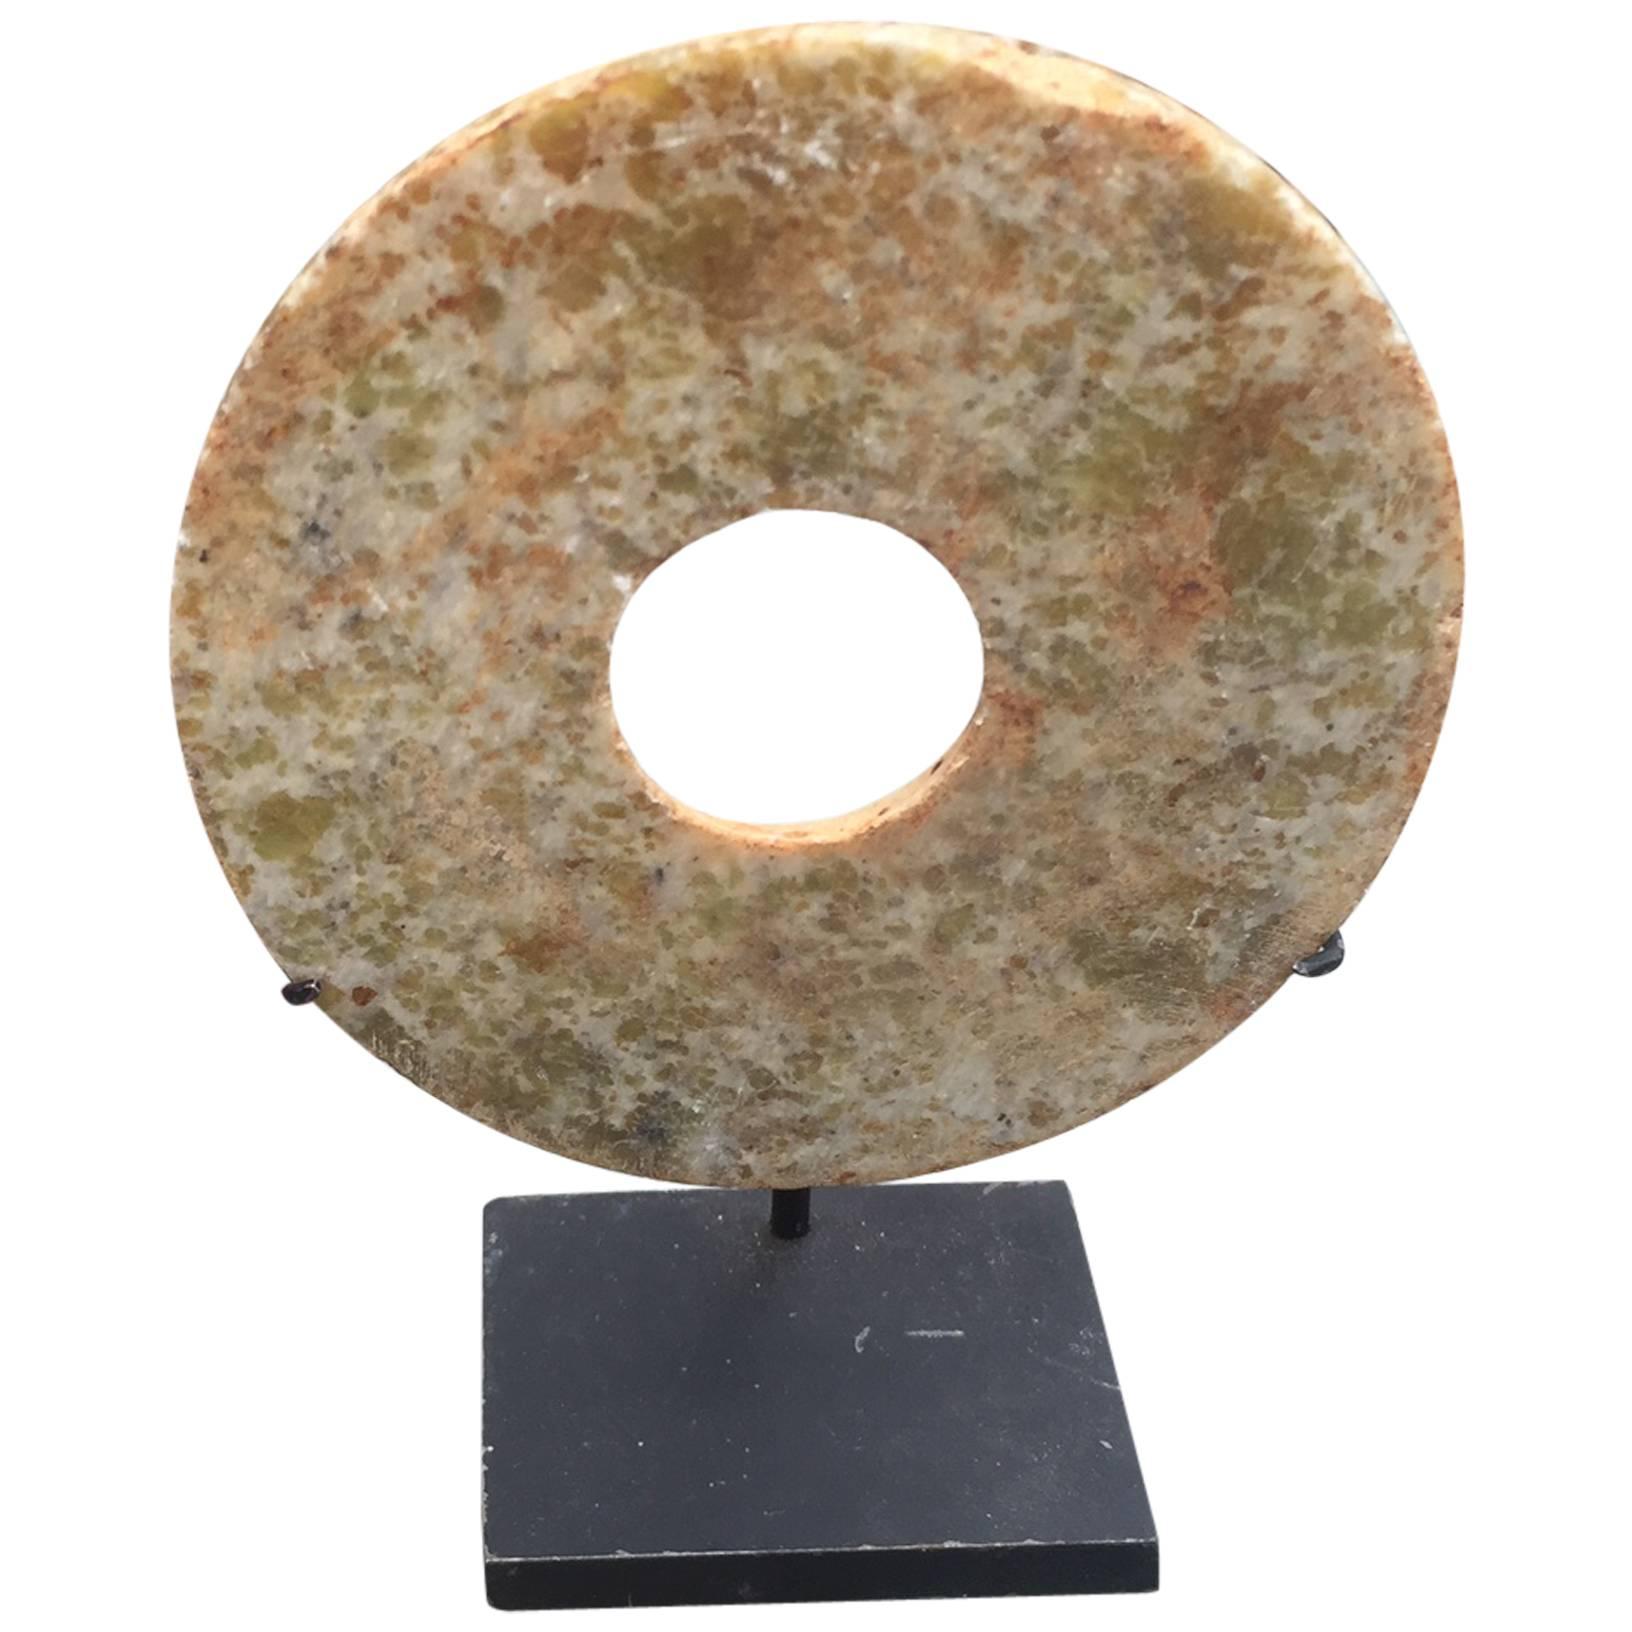 Ancient China, Qi Jia Culture, Early Bronze Age, China Jade Bi Disc with Stand